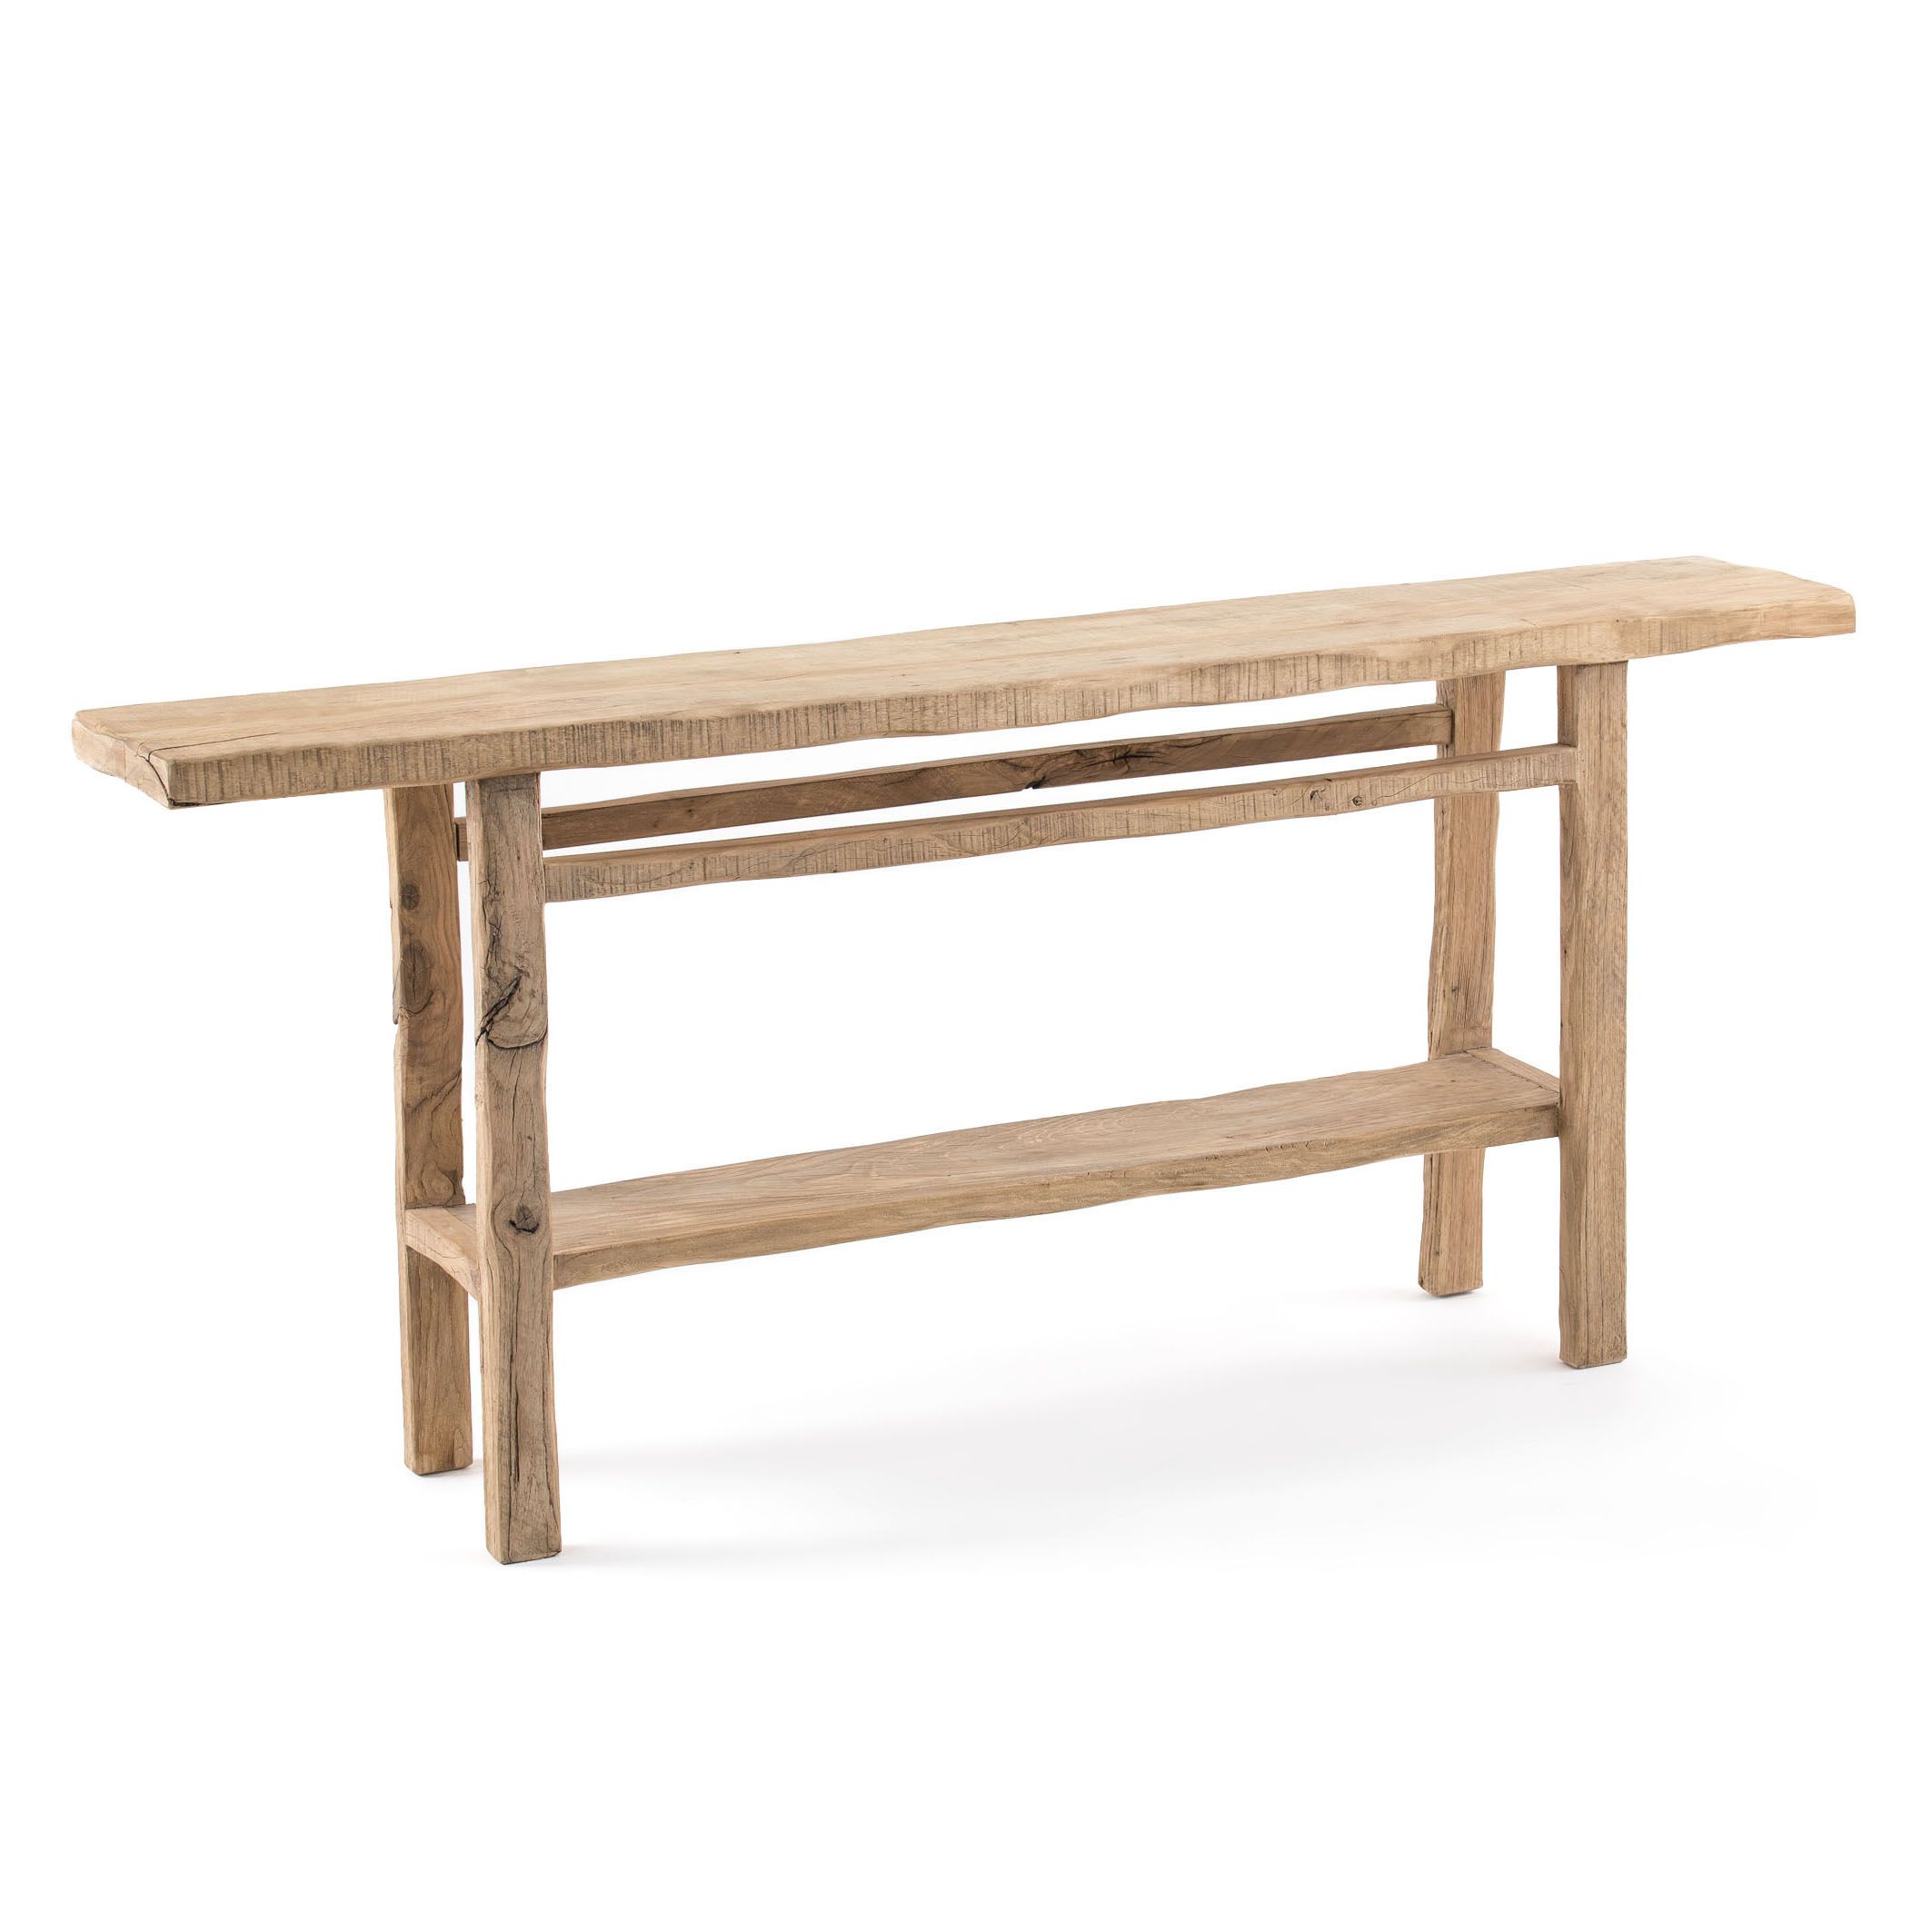 Sumiko XL Recycled Solid Elm Console Table | La Redoute (UK)